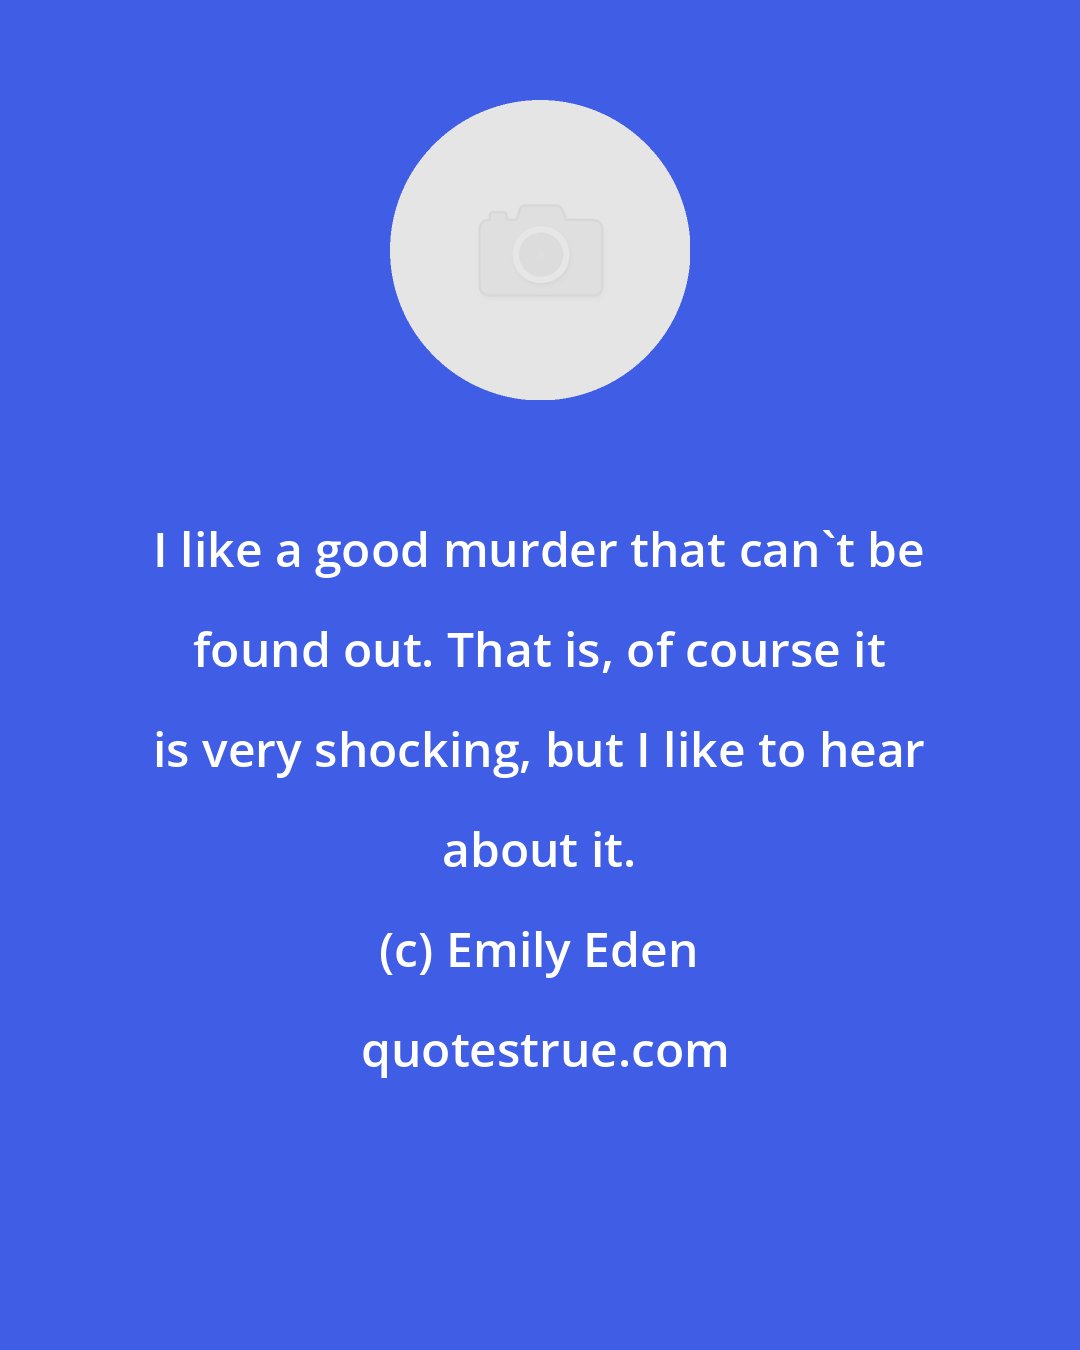 Emily Eden: I like a good murder that can't be found out. That is, of course it is very shocking, but I like to hear about it.